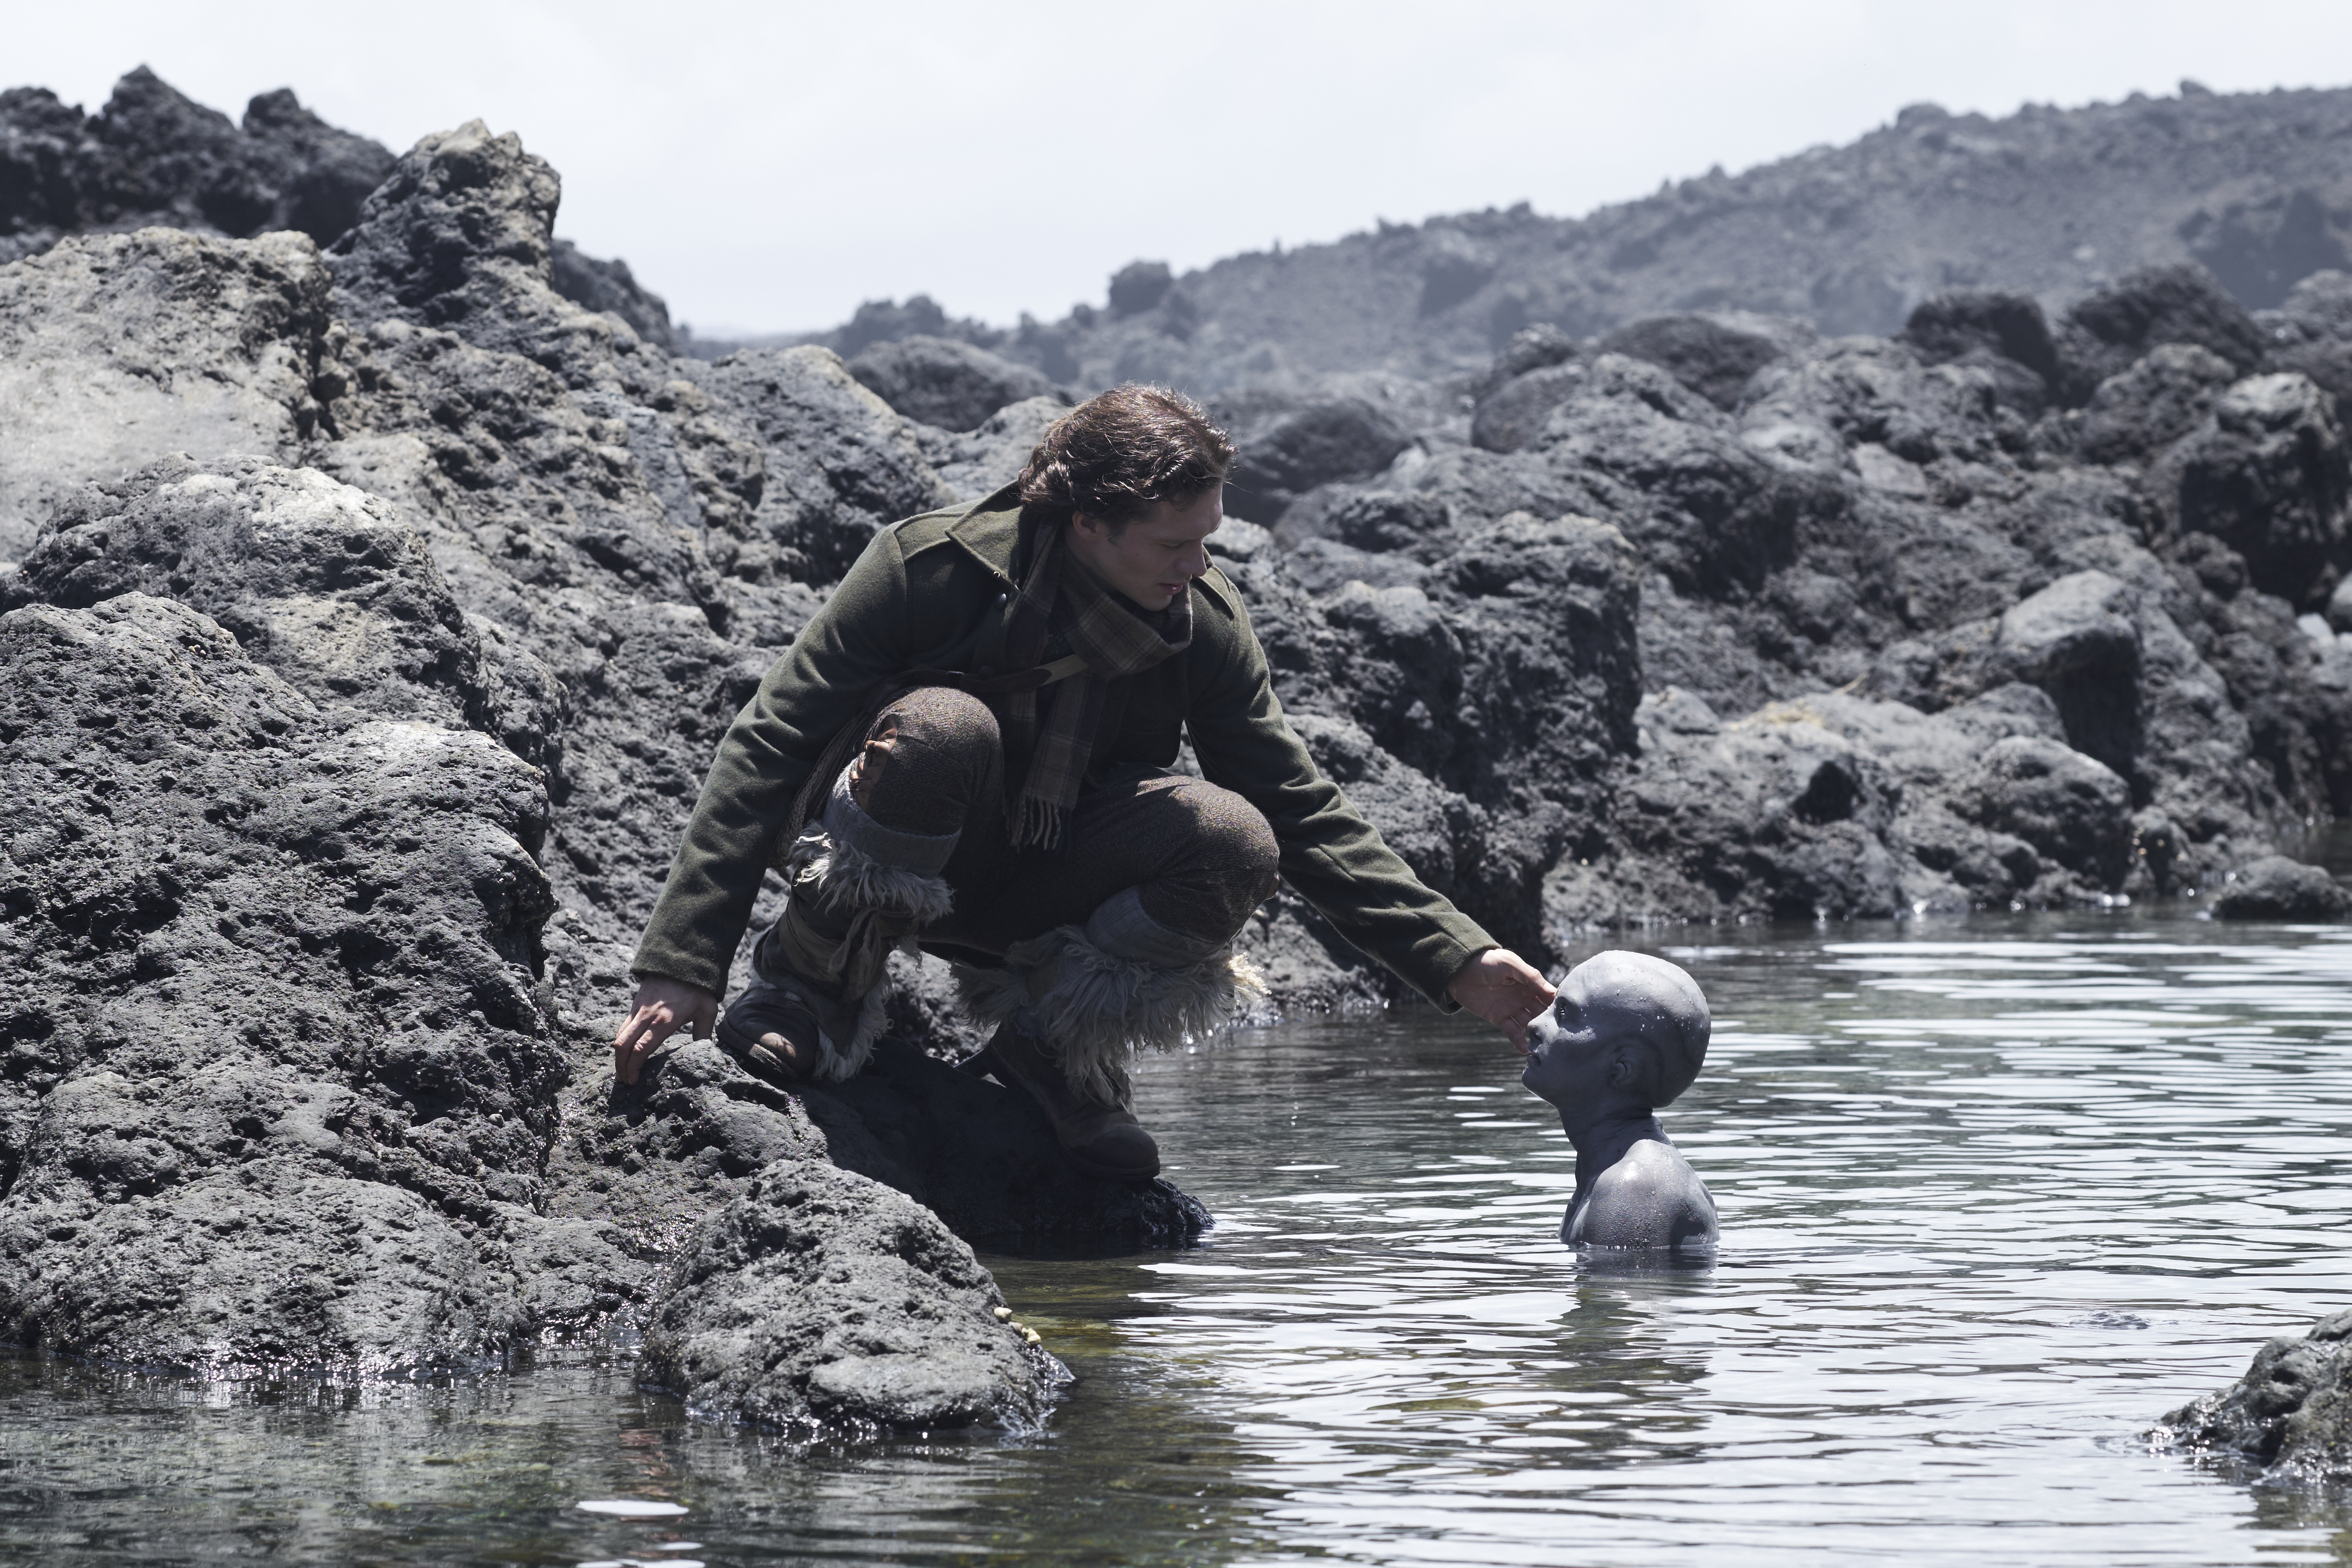 Frame from the movie Cold Skin, featuring actors David Oakes and Aura Garrido